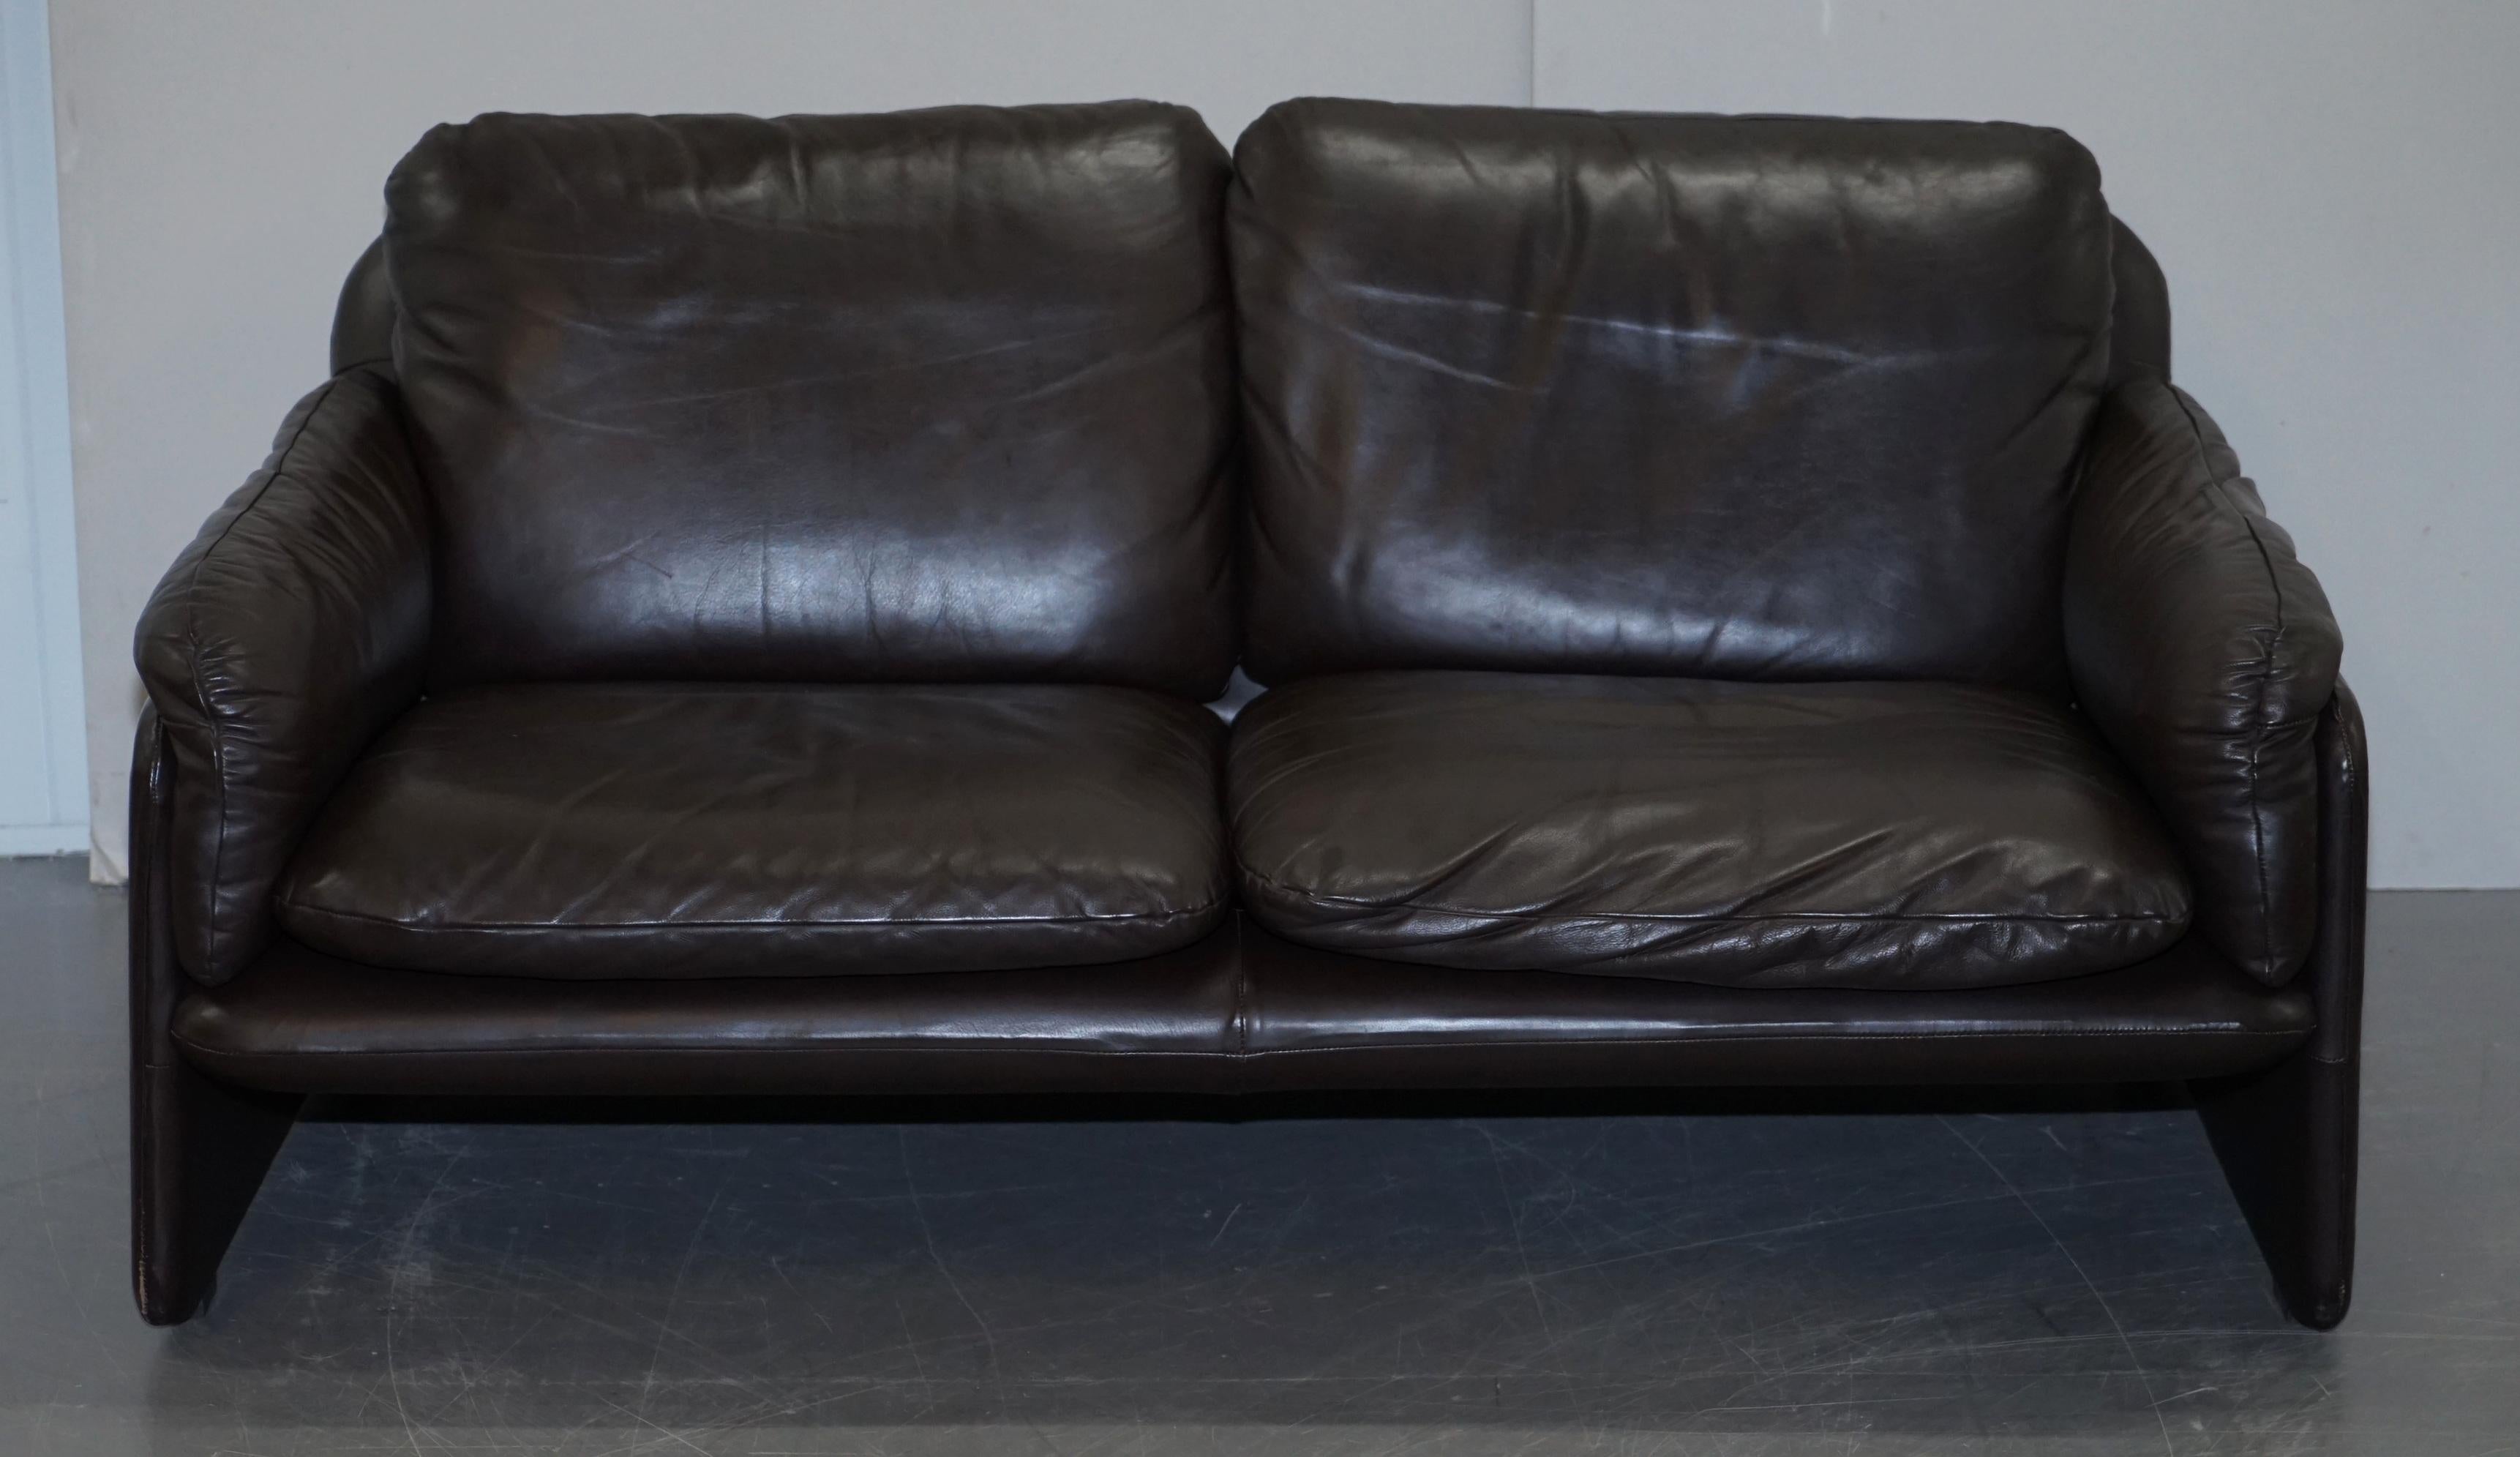 We are delighted to offer for sale this lovely small Mid-Century Modern Danish brown leather two-seat sofa

This sofa is a wonderful size, super art modern cool which seems to be the way with almost all the Danish leather seating from this era,